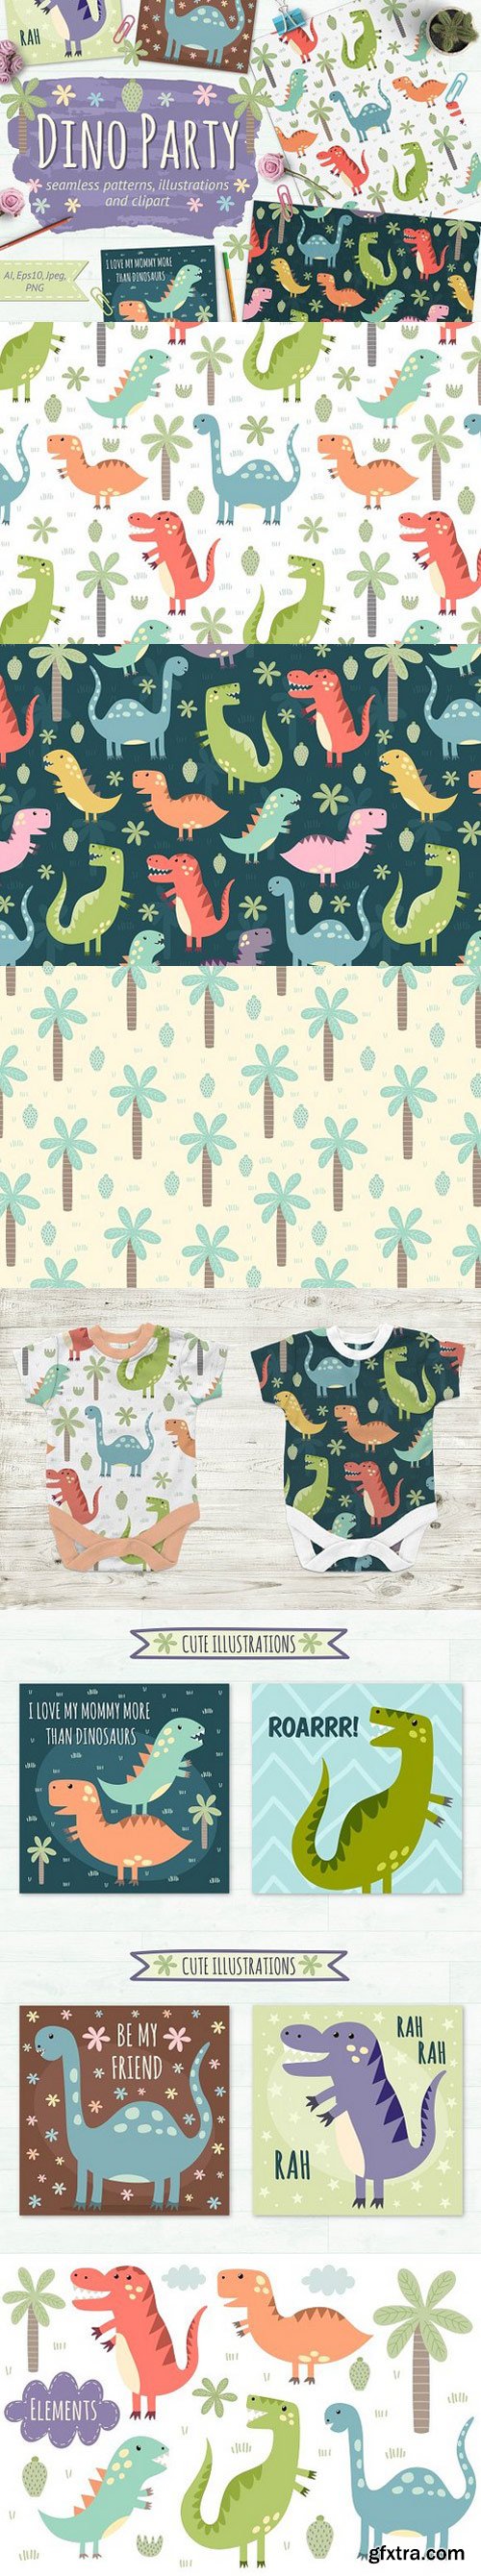 CM - Dino Party: patterns & illustrations 1389873